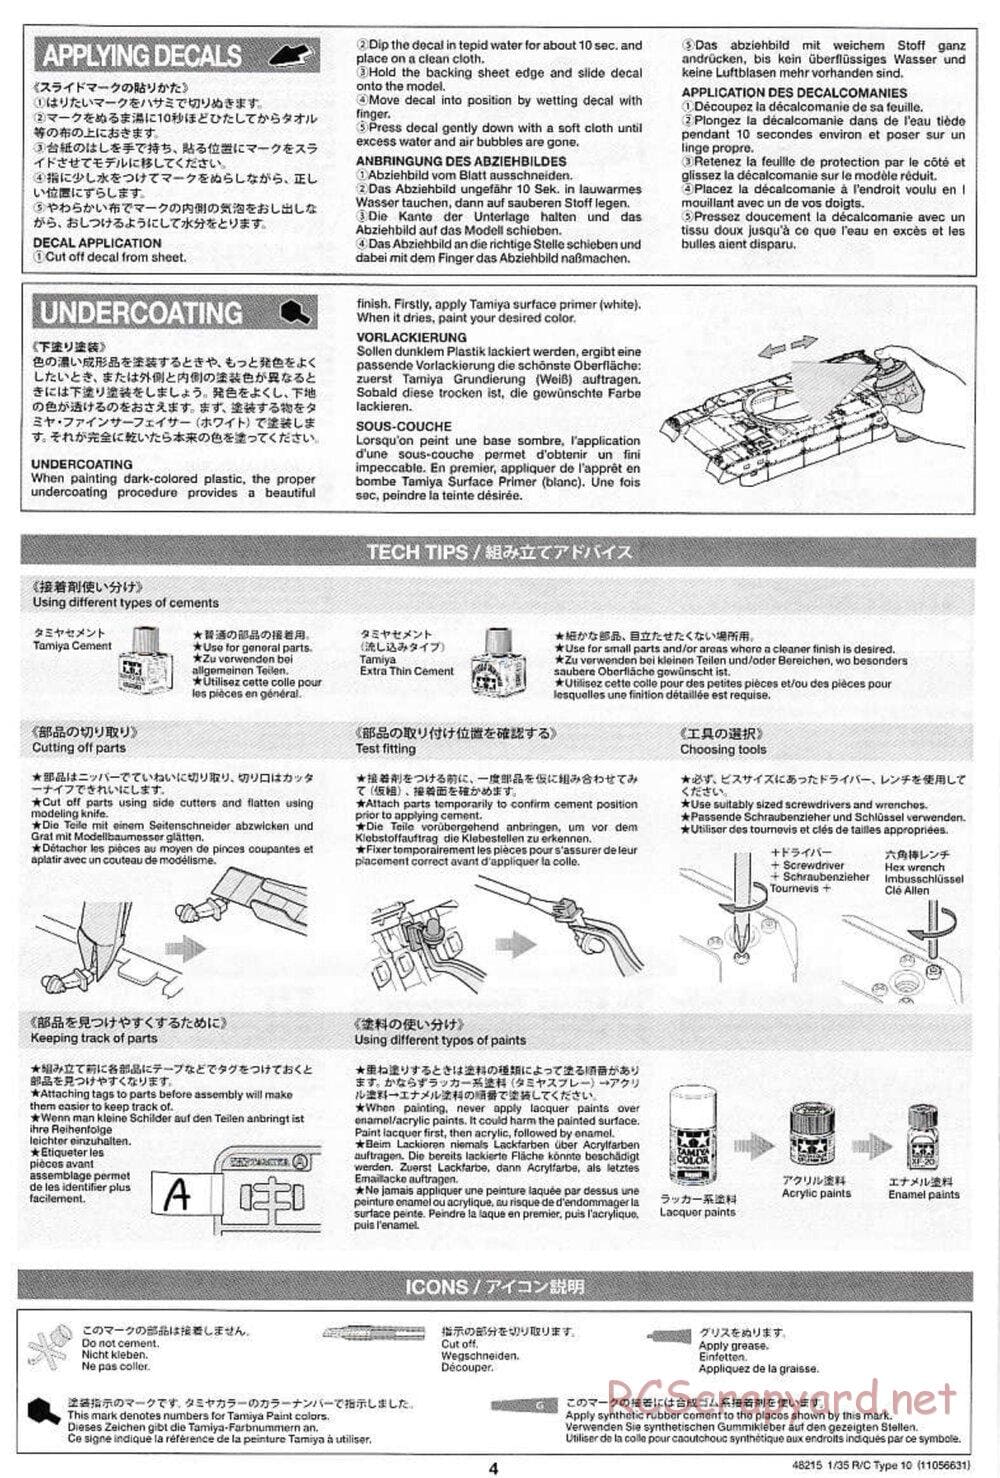 Tamiya - JGSDF Type 10 Tank - 1/35 Scale Chassis - Manual - Page 4